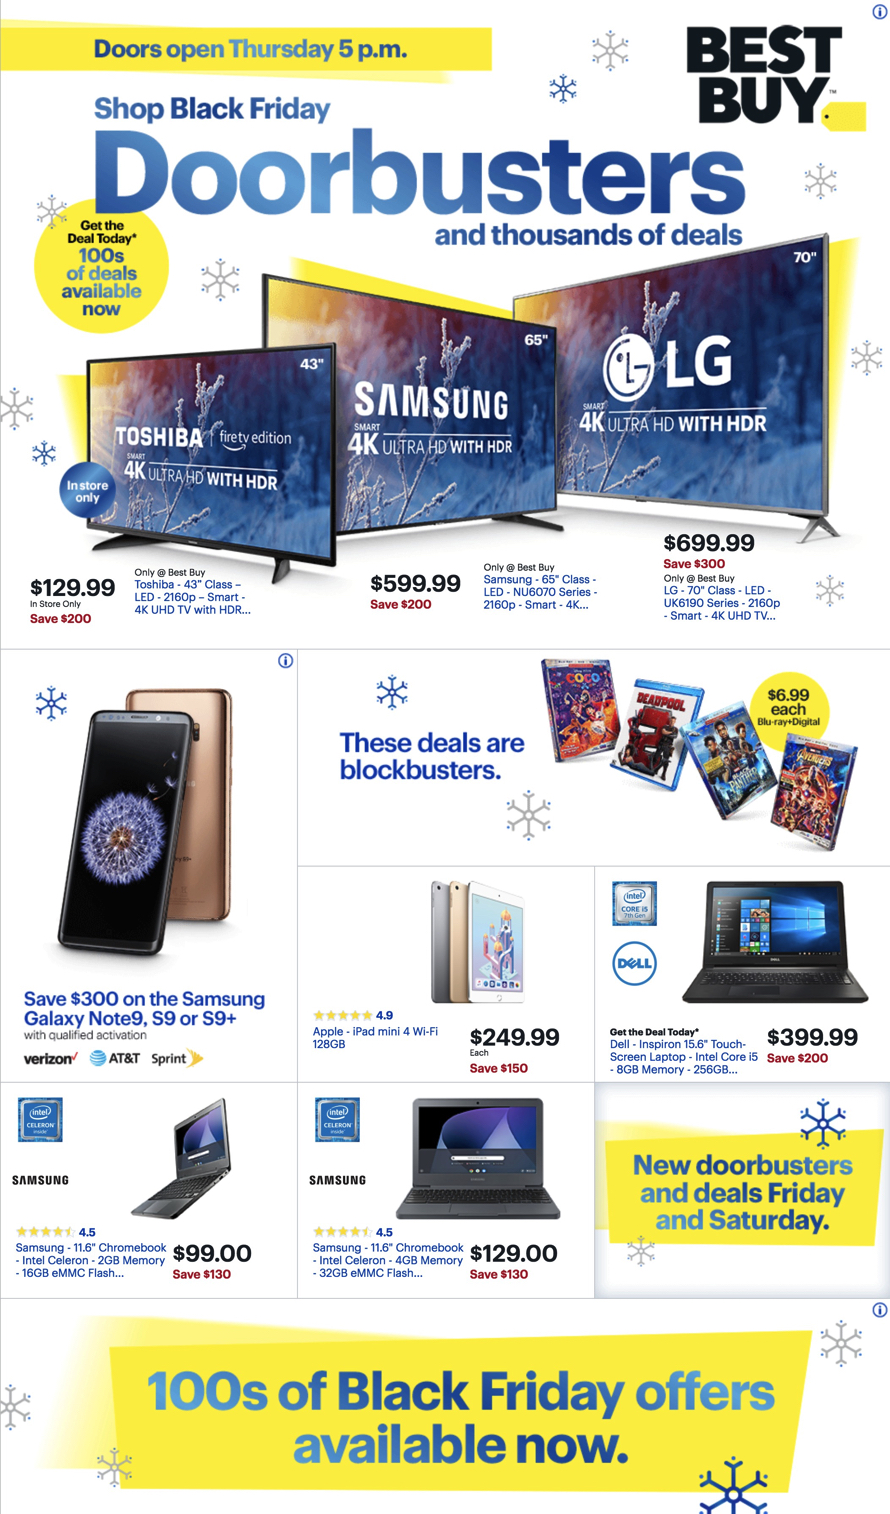 Best Buy Black Friday ad delivers Apple deals, TVs, more 9to5Toys